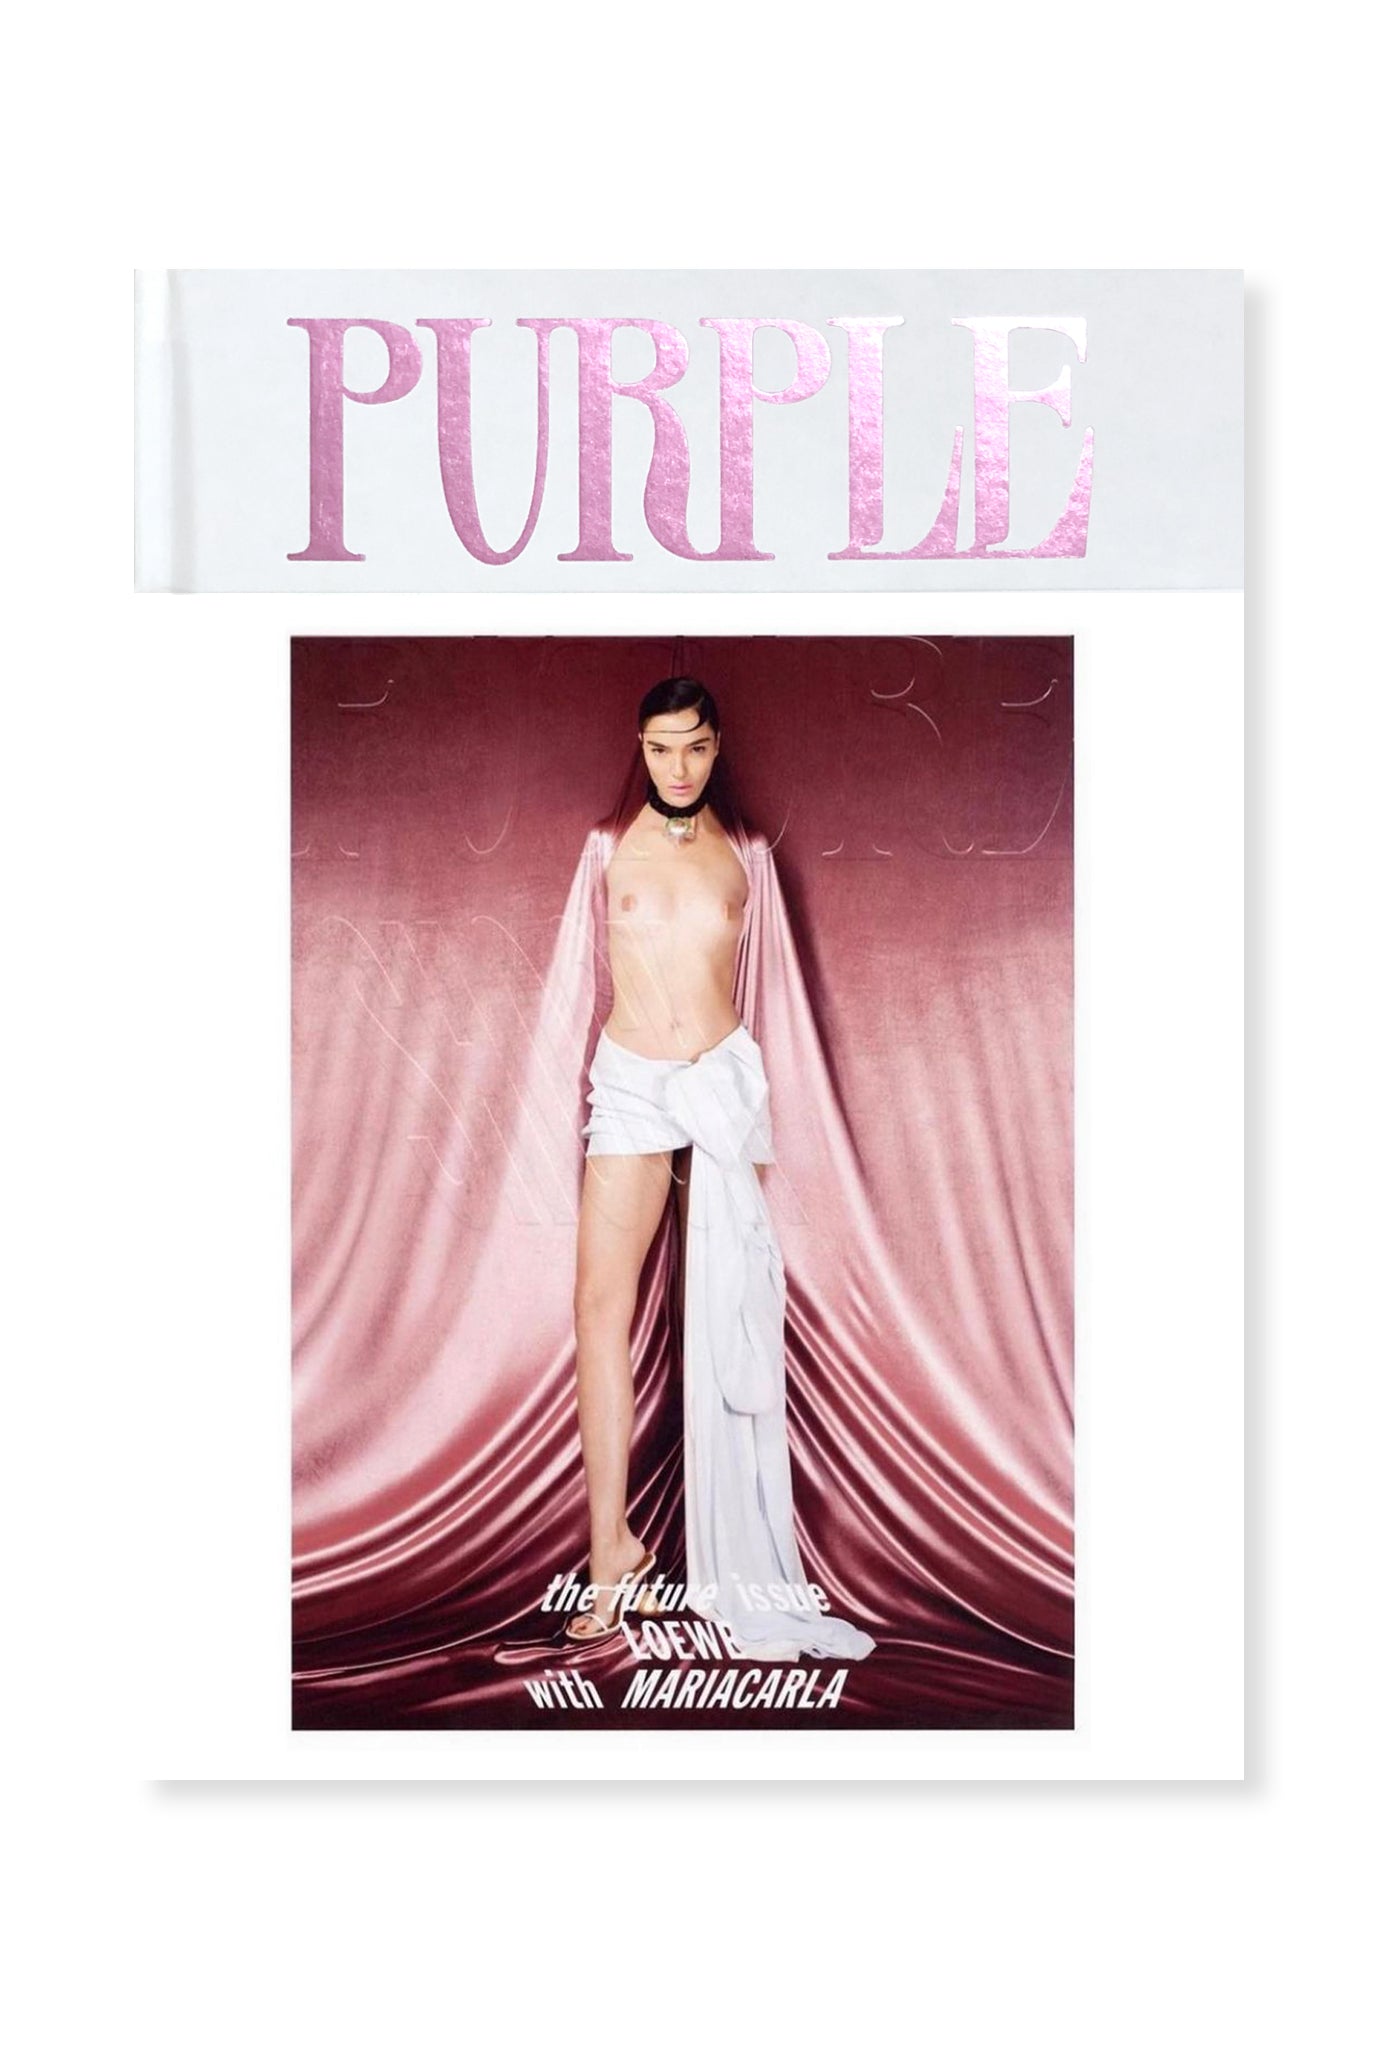 Purple, Issue 37 - The Future Issue